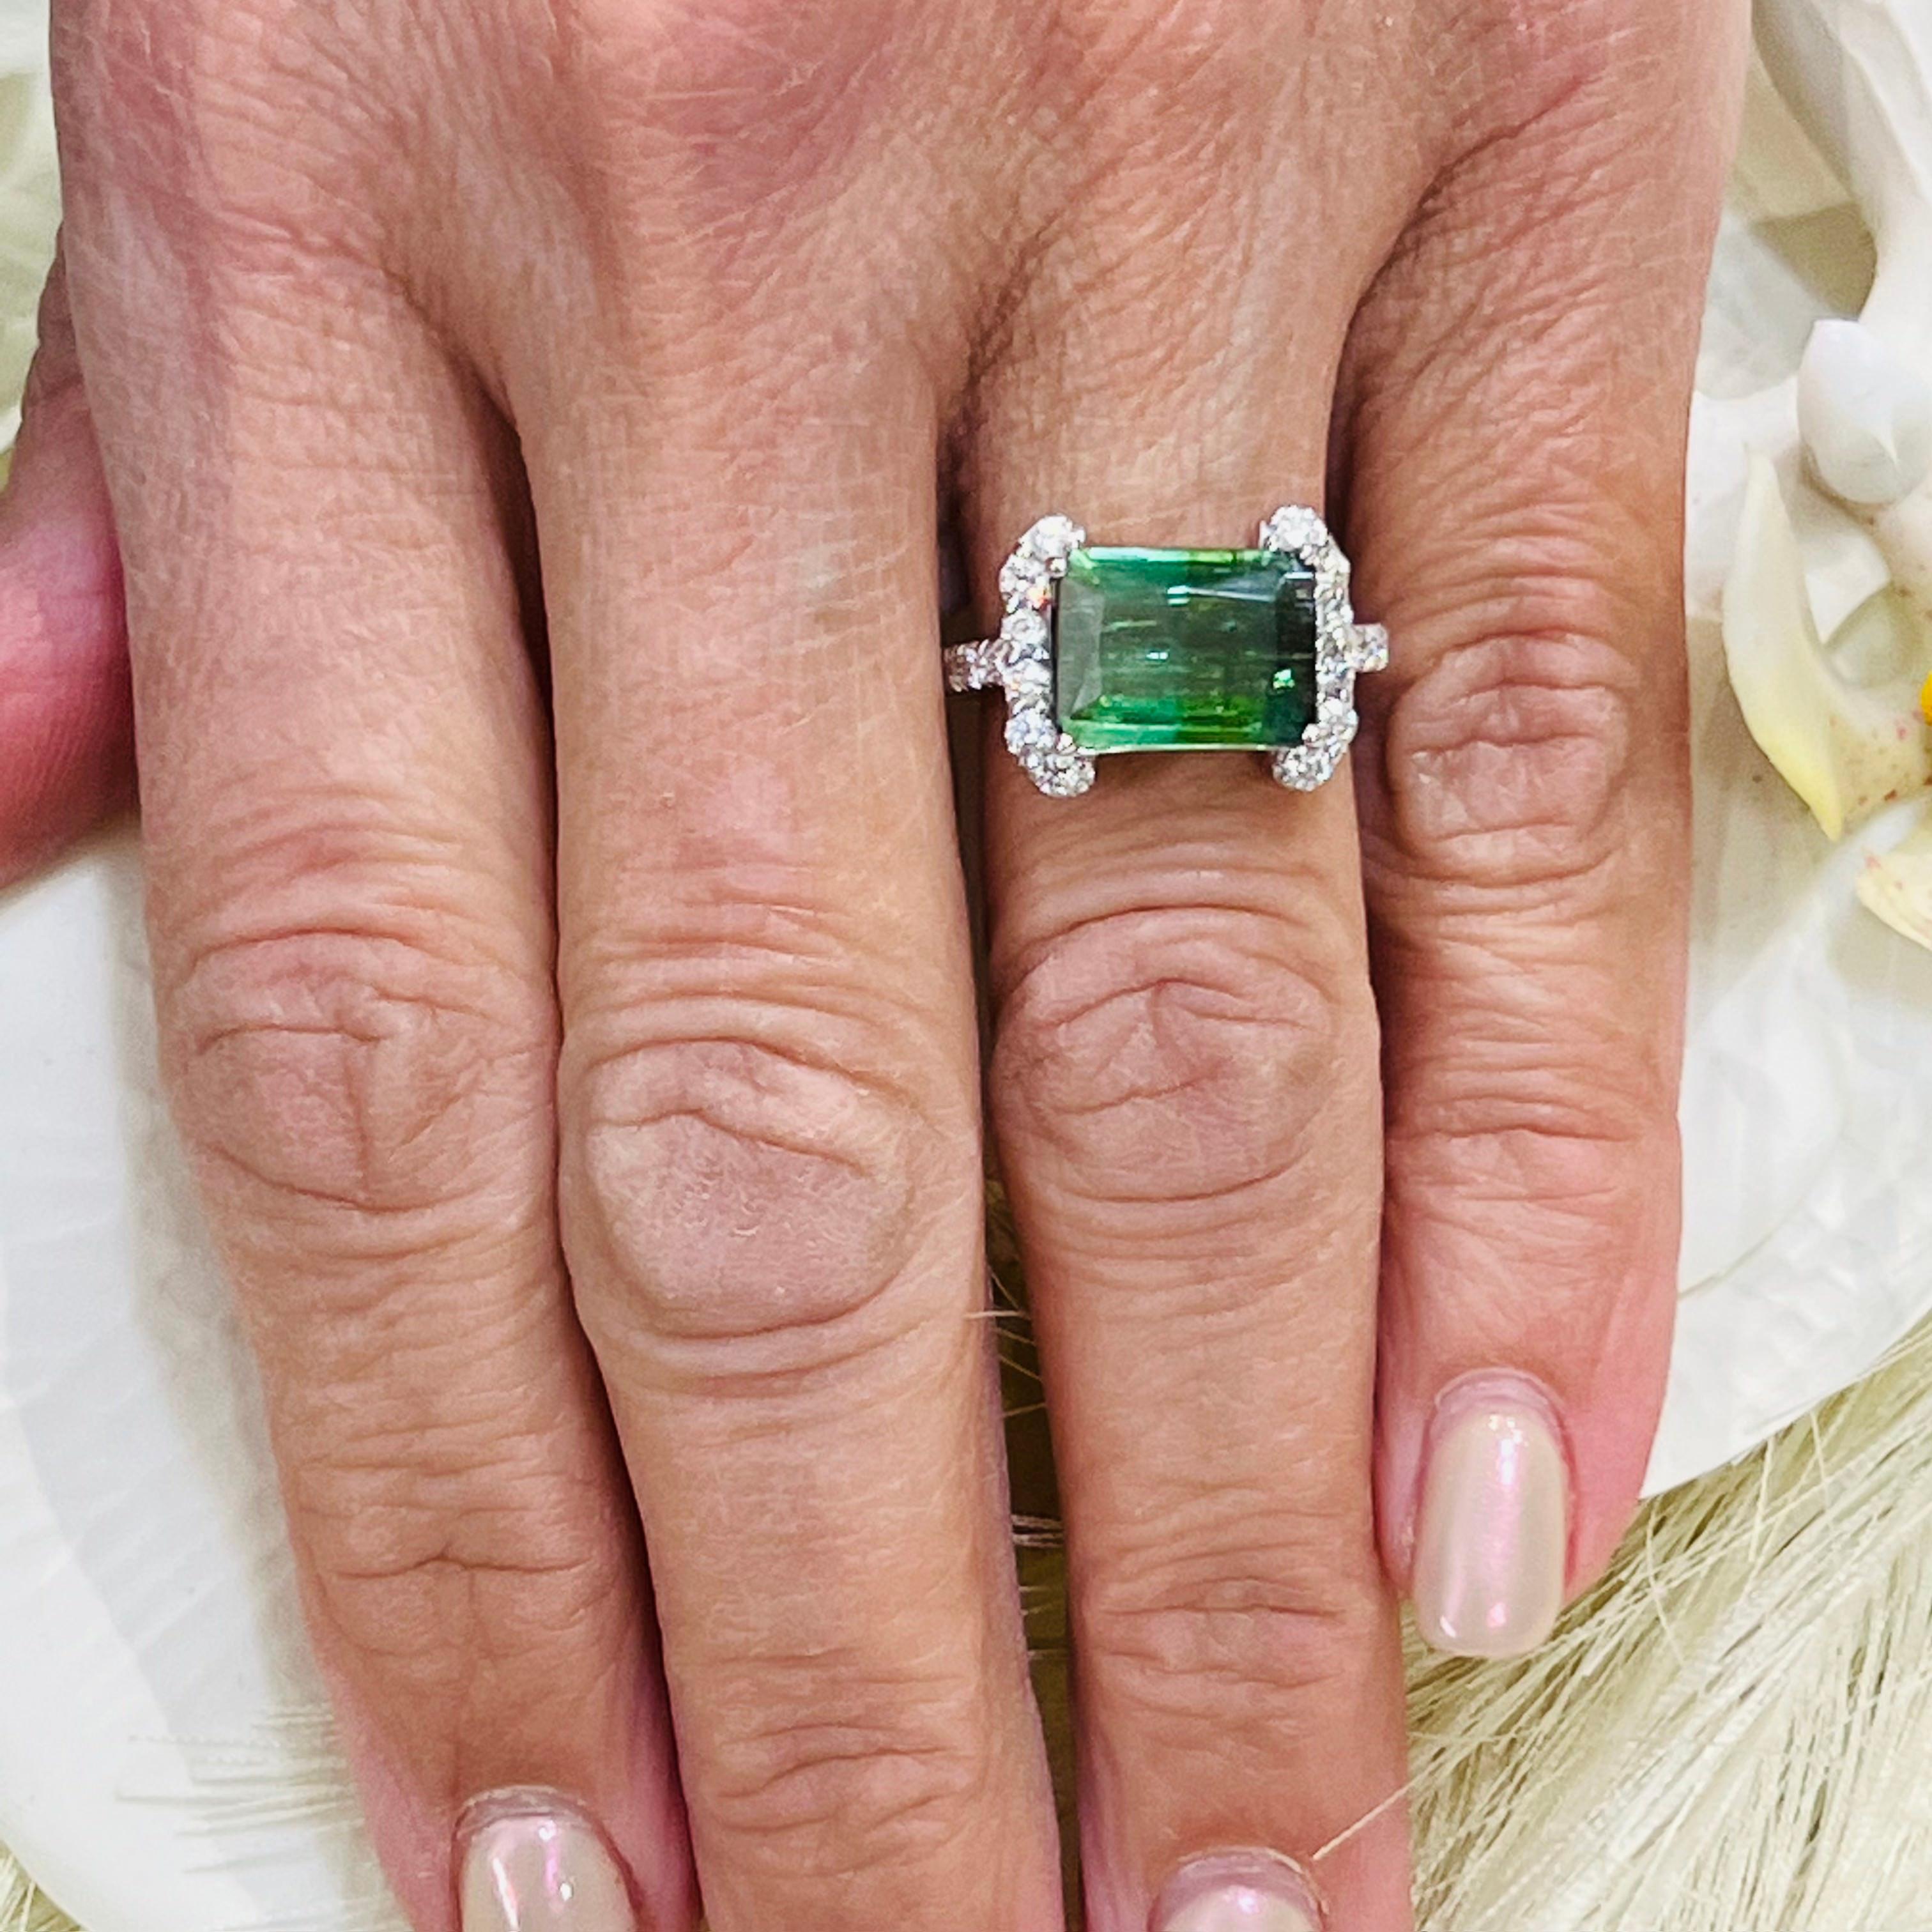 Natural Tourmaline Diamond Ring Size 6.5 14k W Gold 4.2 TCW Certified $5,975 217859

This is a one of a Kind Unique Custom Made Glamorous Piece of Jewelry!

Nothing says, “I Love you” more than Diamonds and Pearls!

This item has been Certified,